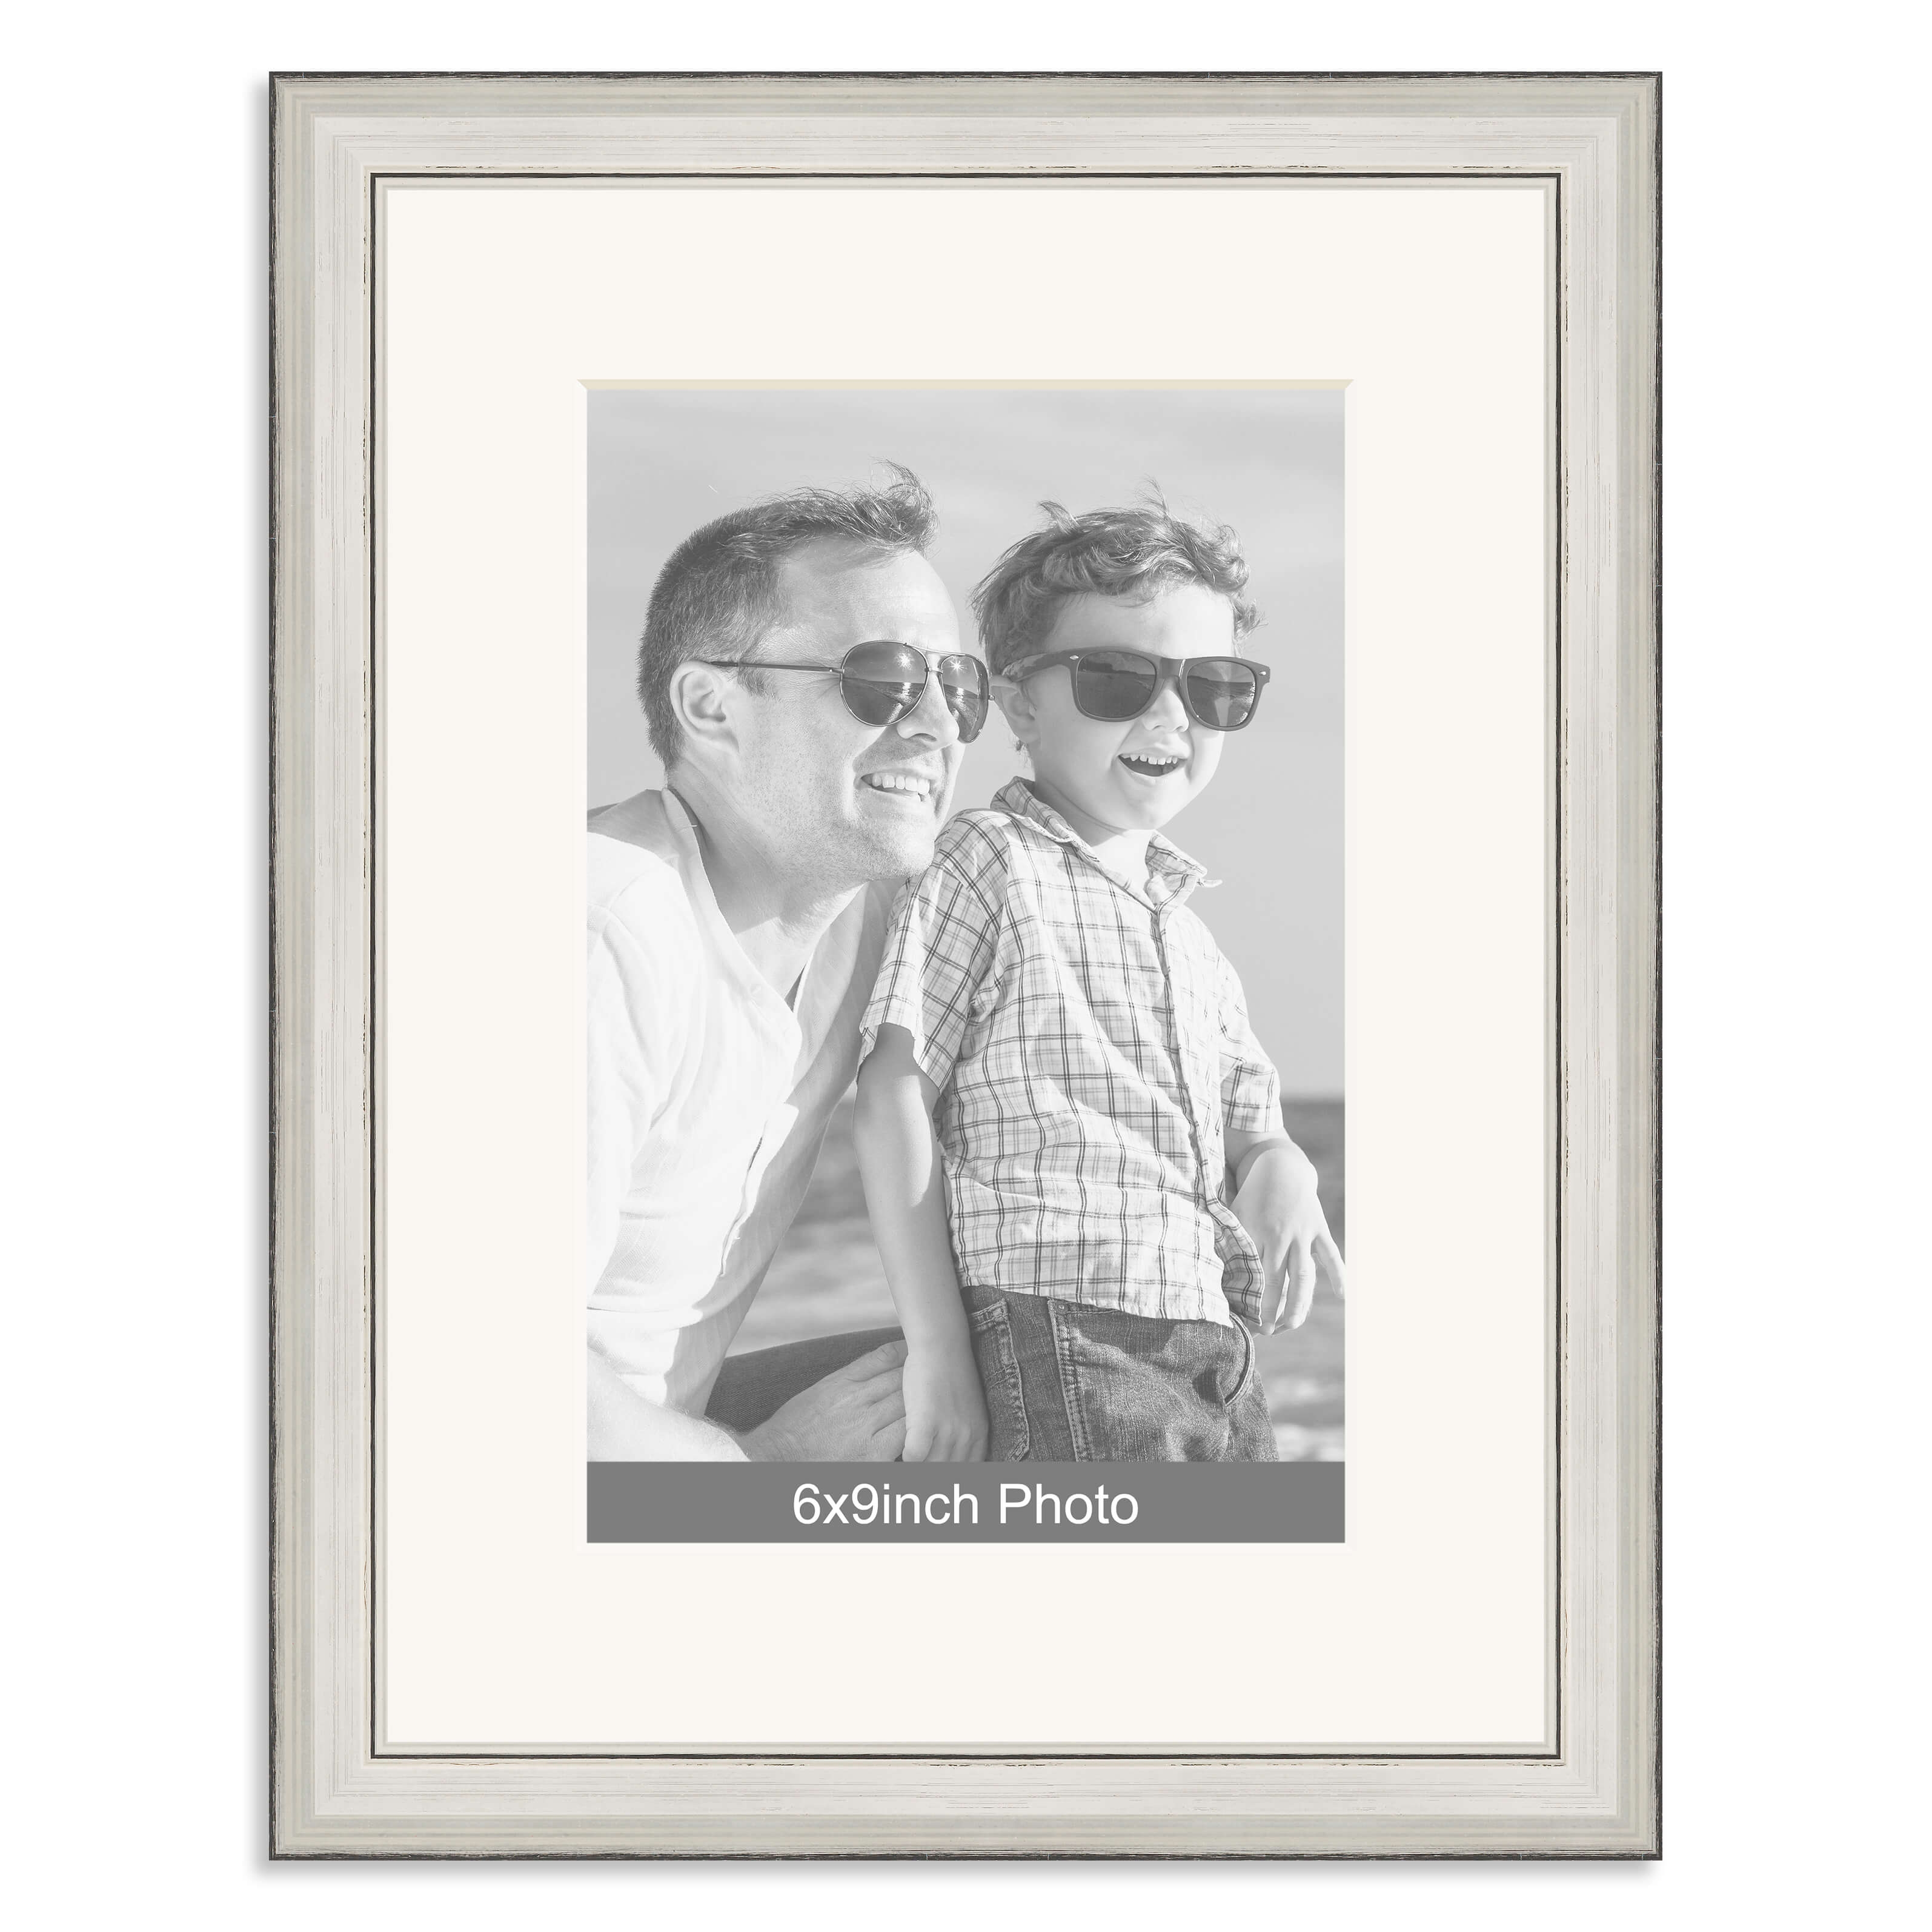 Silver Wooden Photo Frame with mount for a 9×6/6x9in Photo – Photo uploaded below